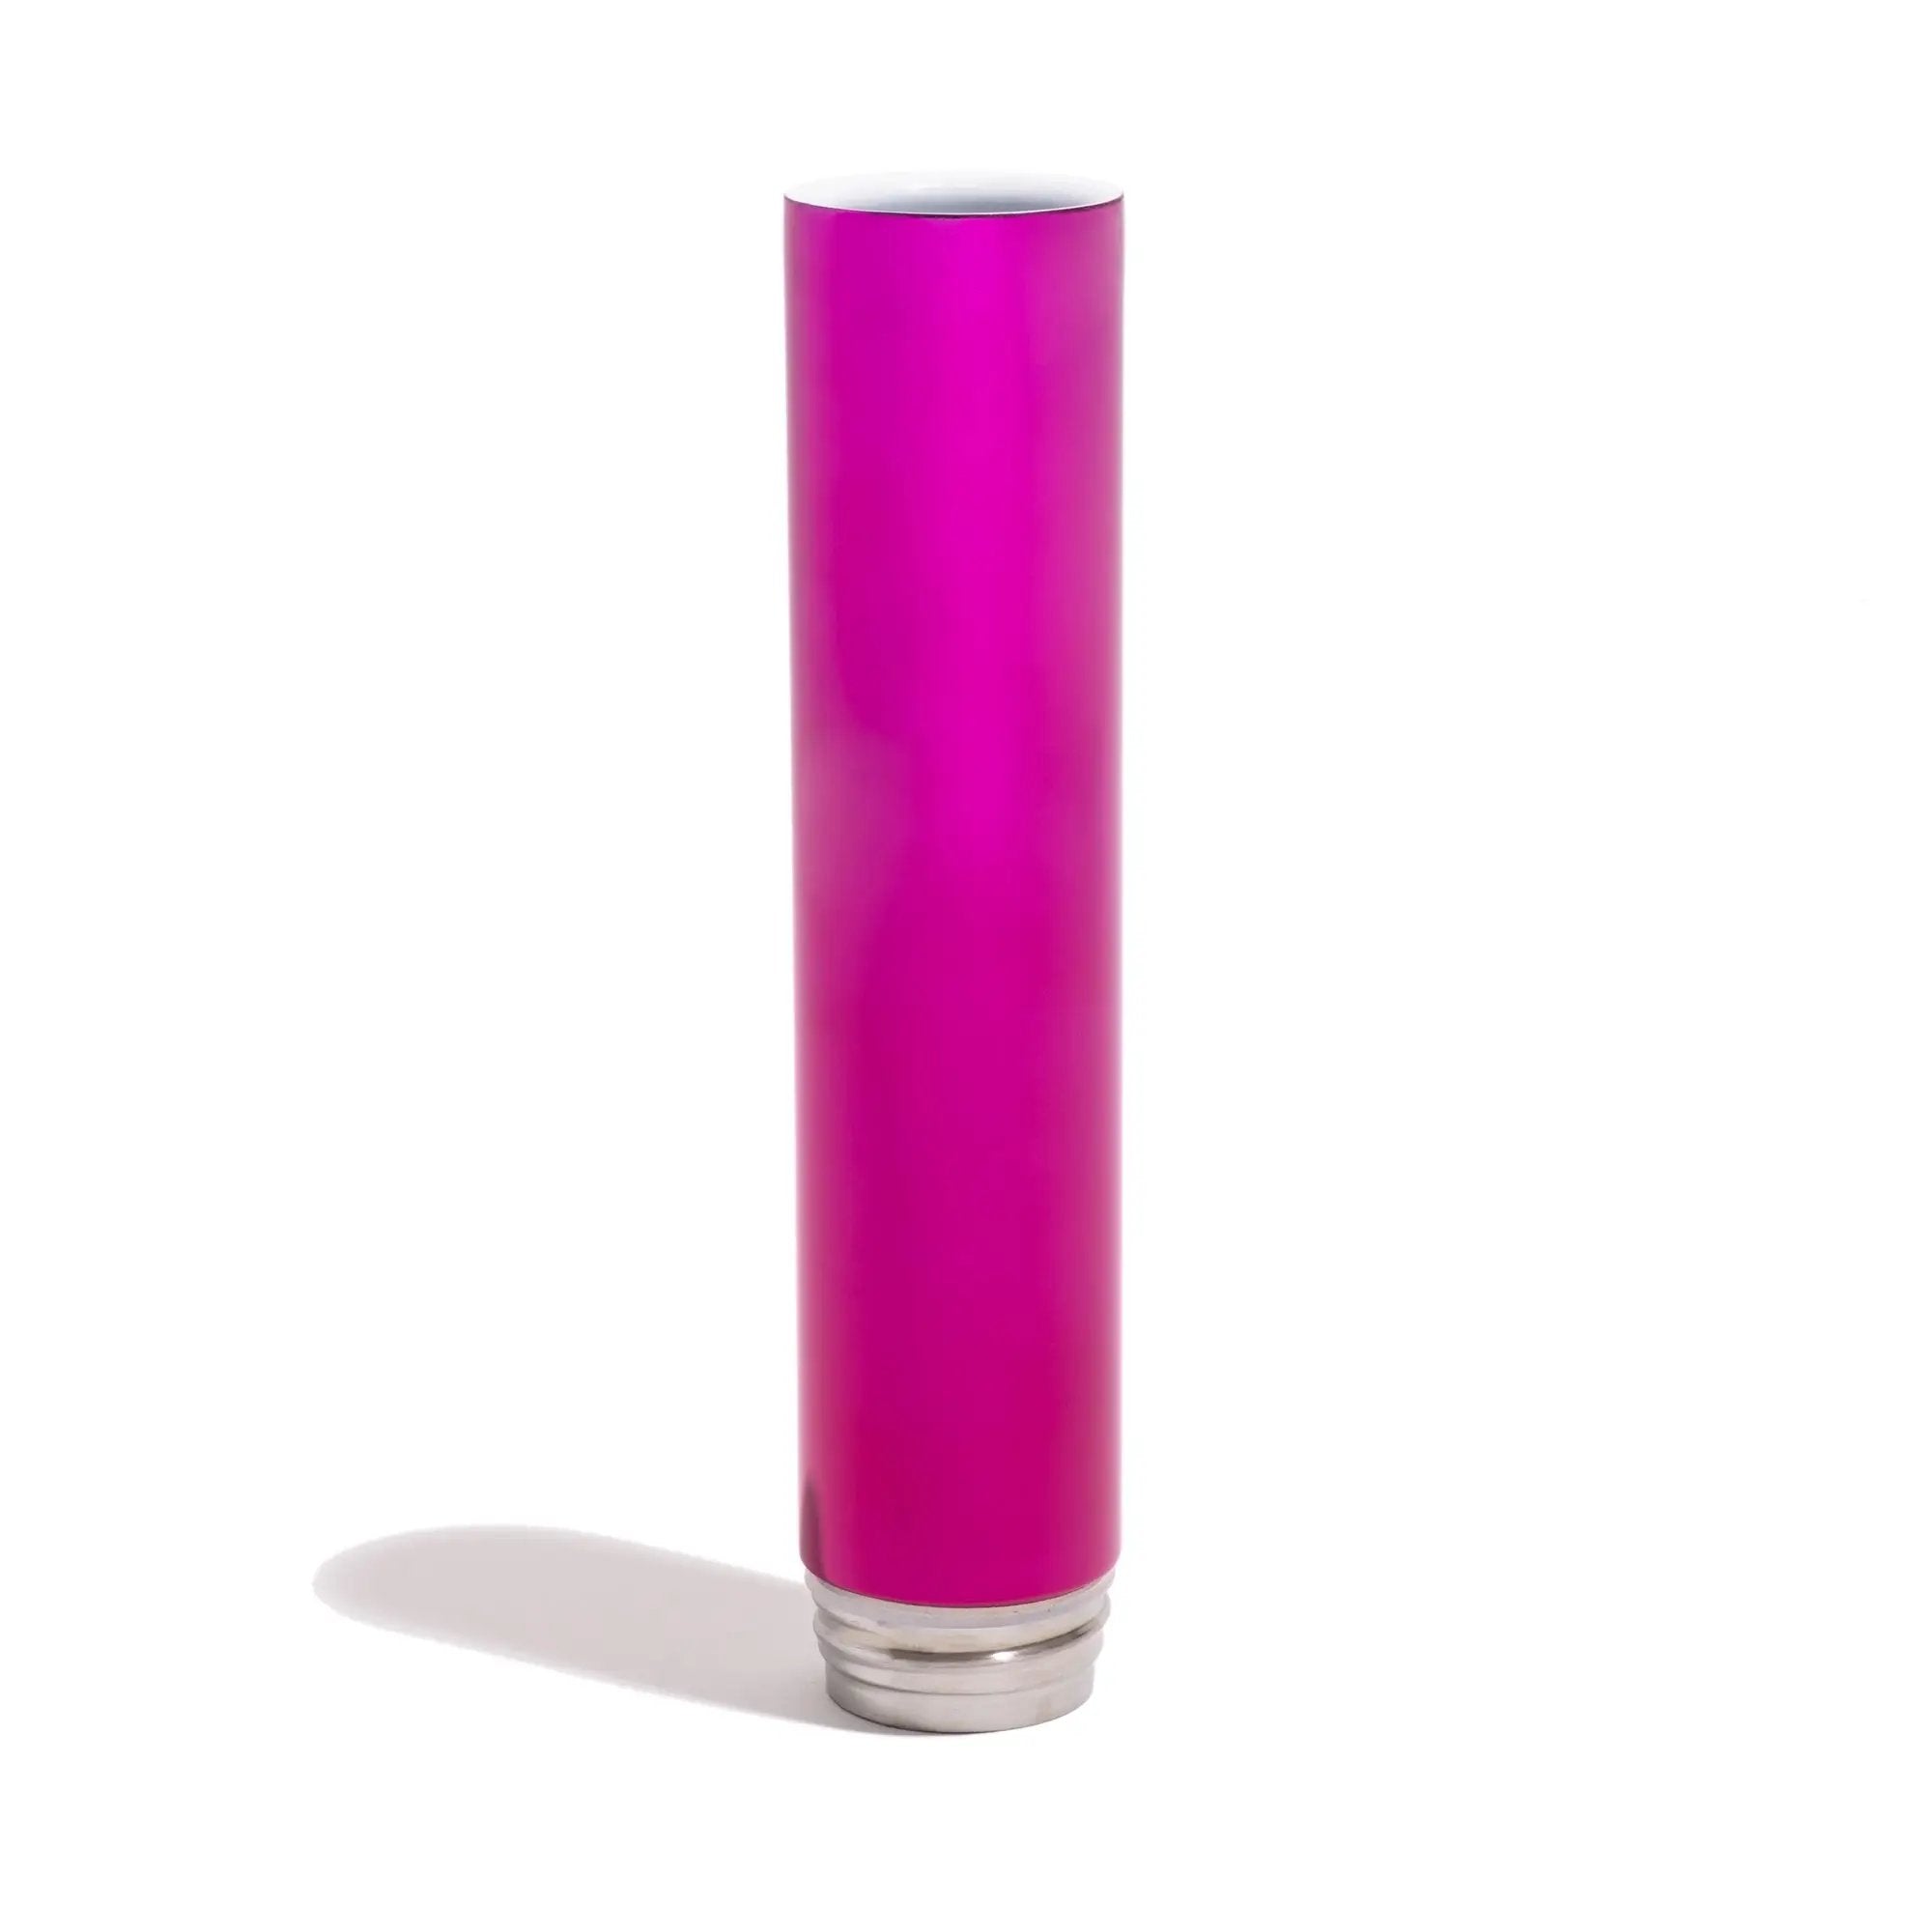 Chill - Limited Edition - Magenta Mirror by Chill Steel Pipes